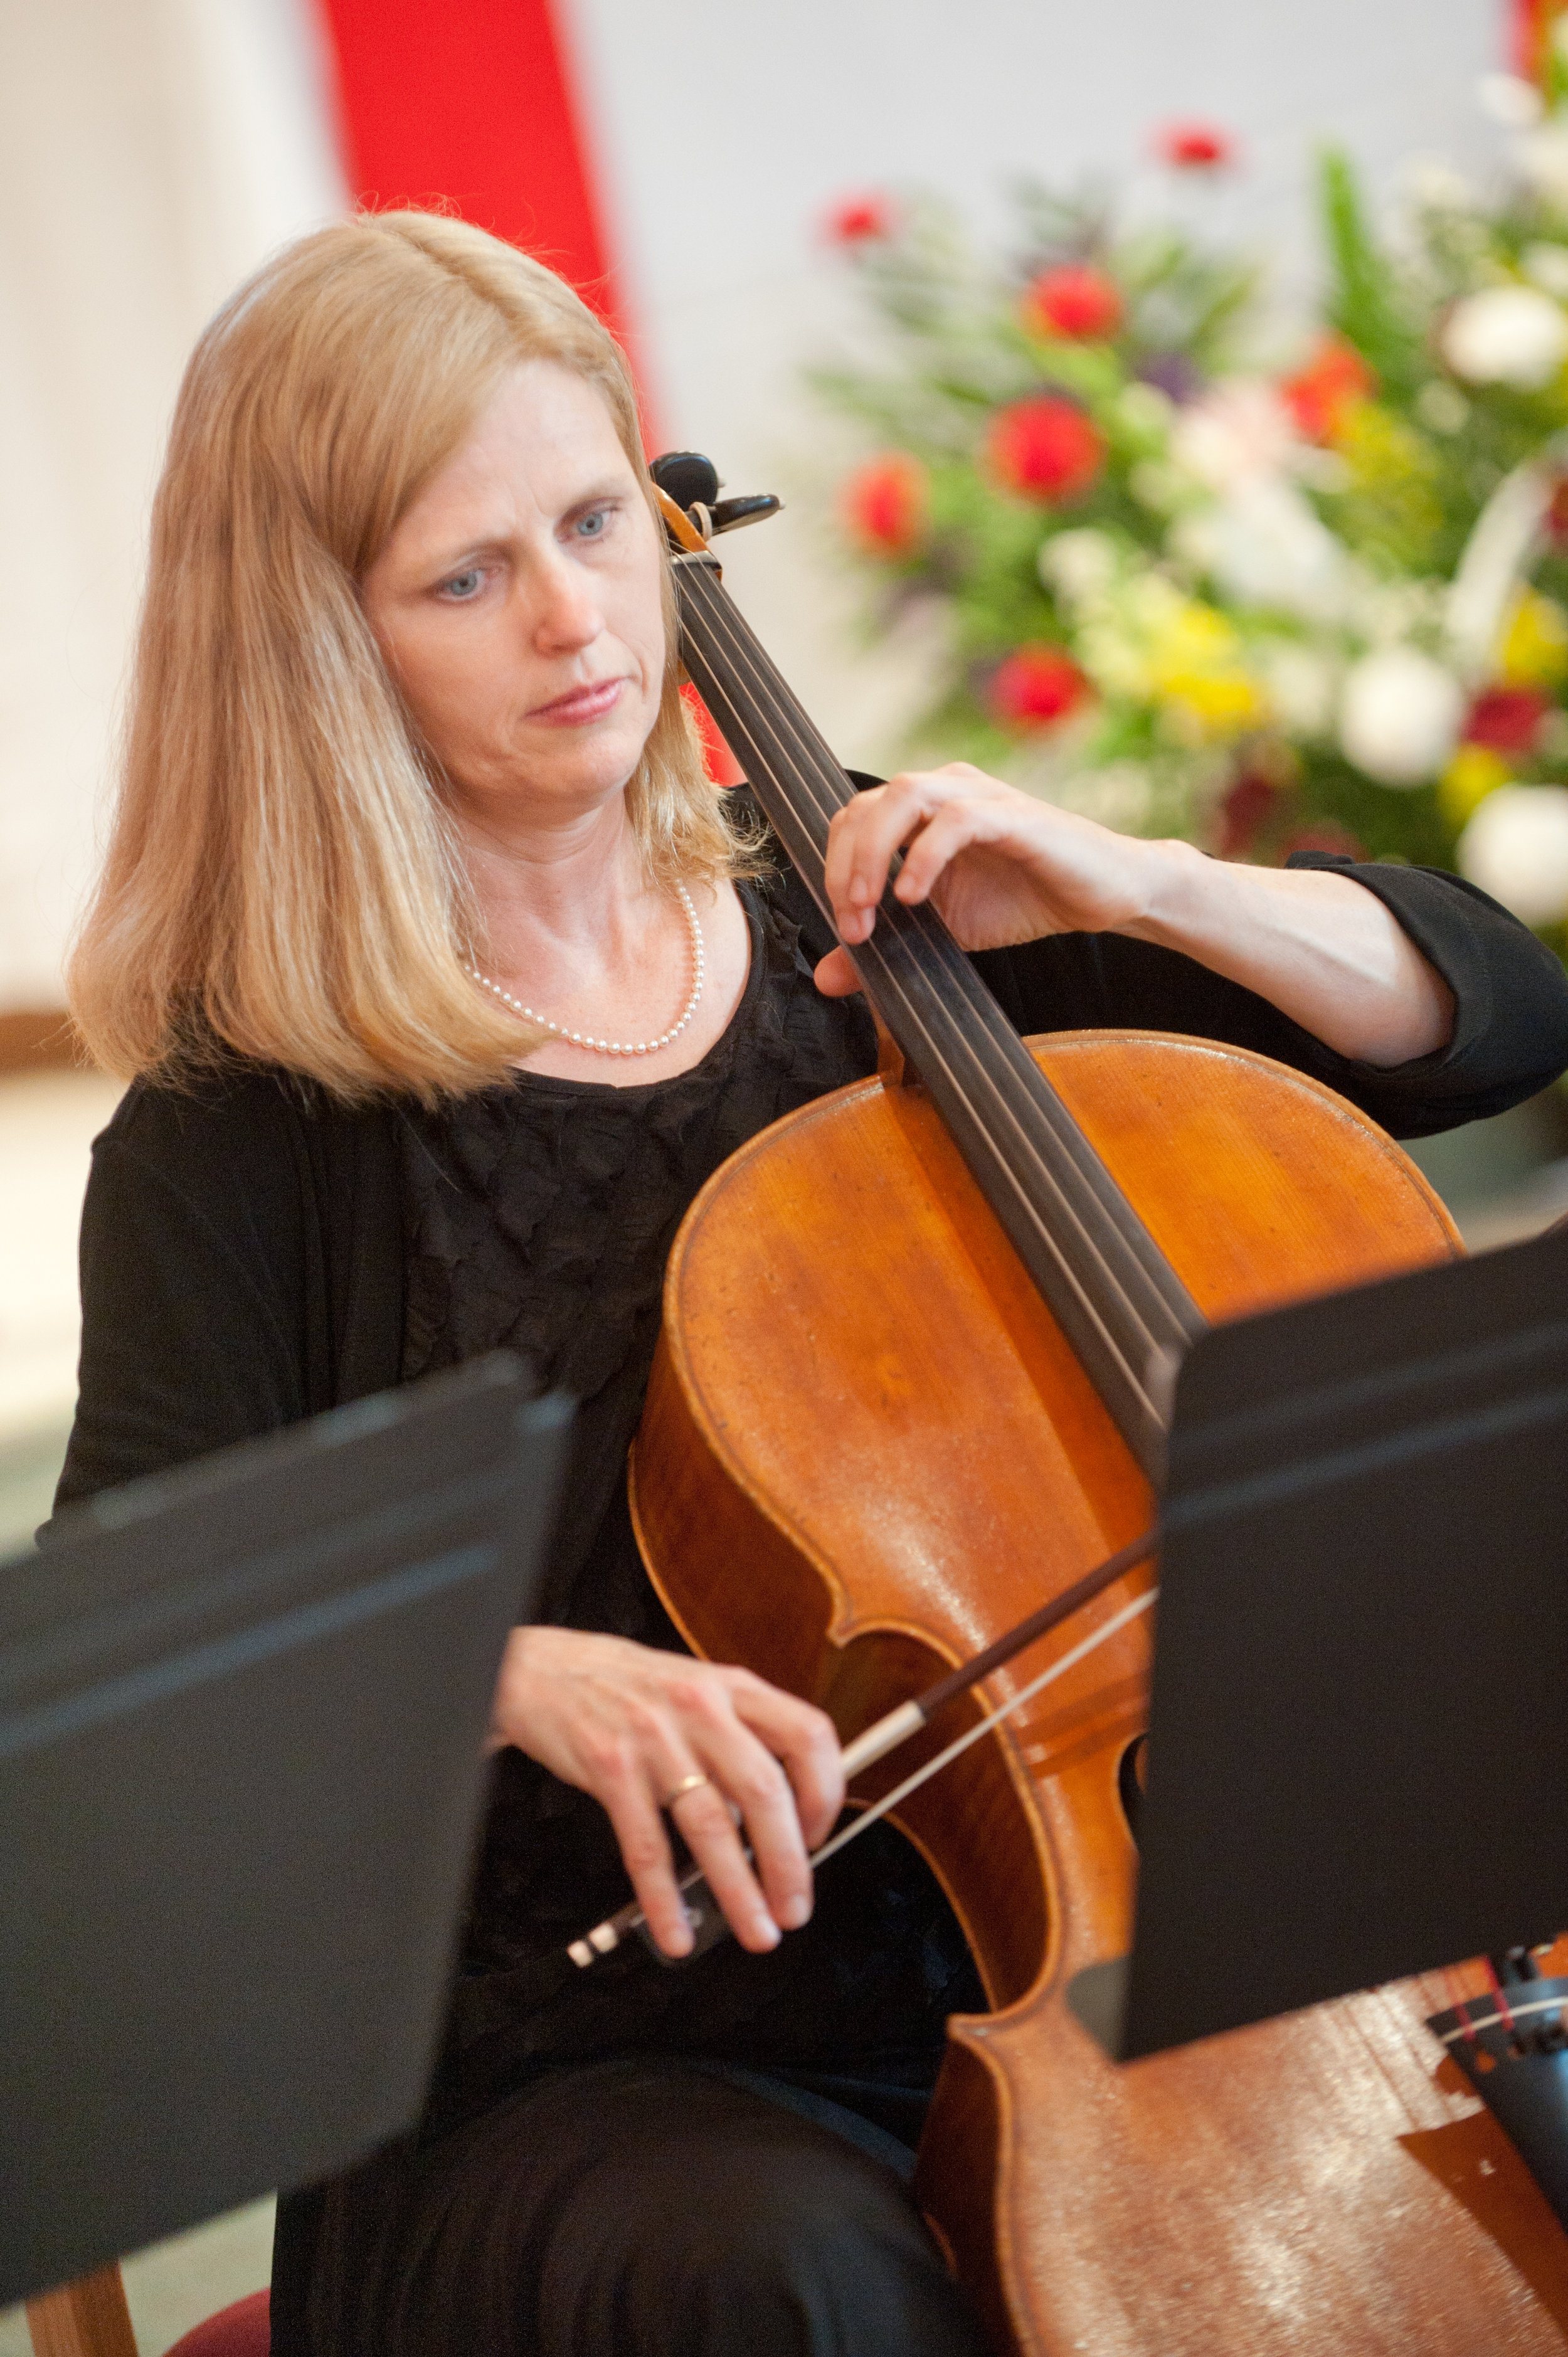 Kathy playing cello at a church event